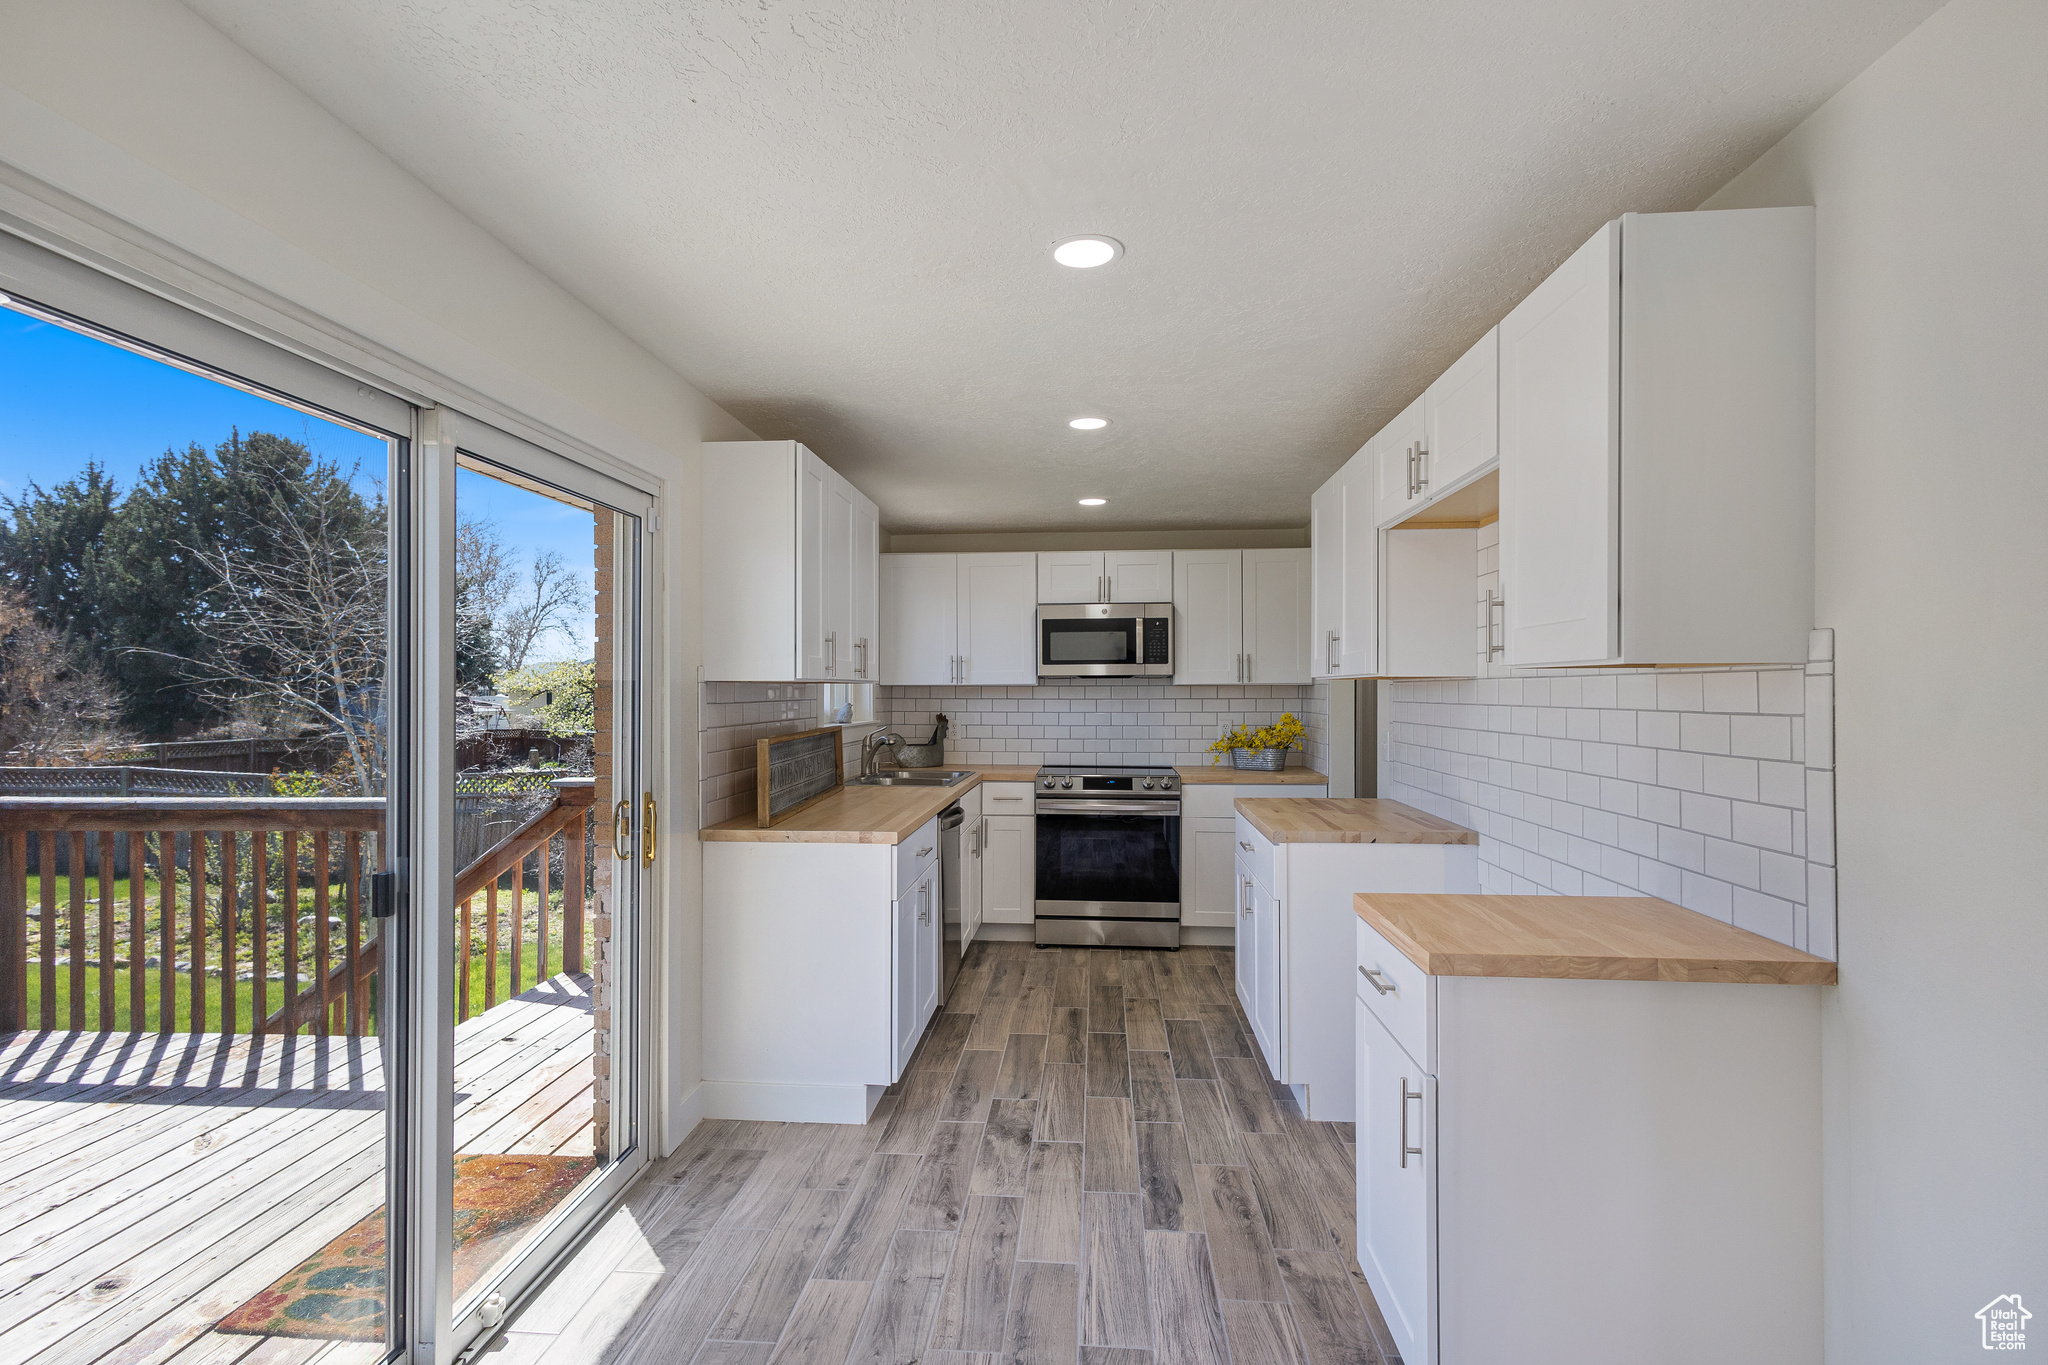 Updated Kitchen featuring tiled backsplash, Stainless appliances , Butcher Block countertops, and tile floors.cabinetry, and wood counters. Sliding glass doors to large deck.